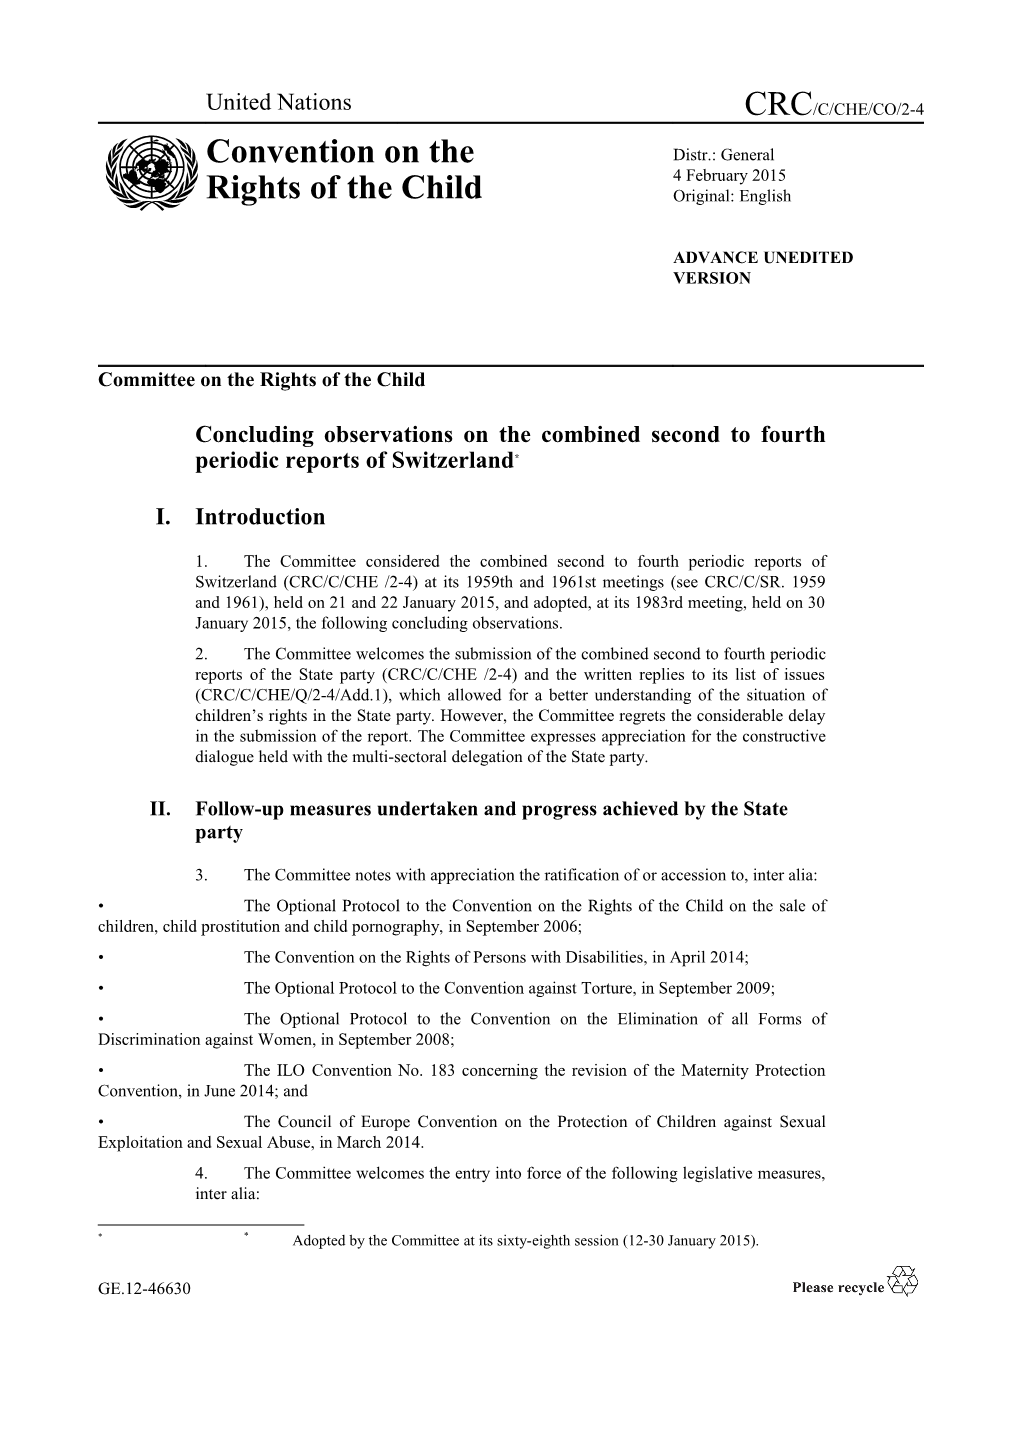 Committee on the Rights of the Child s13